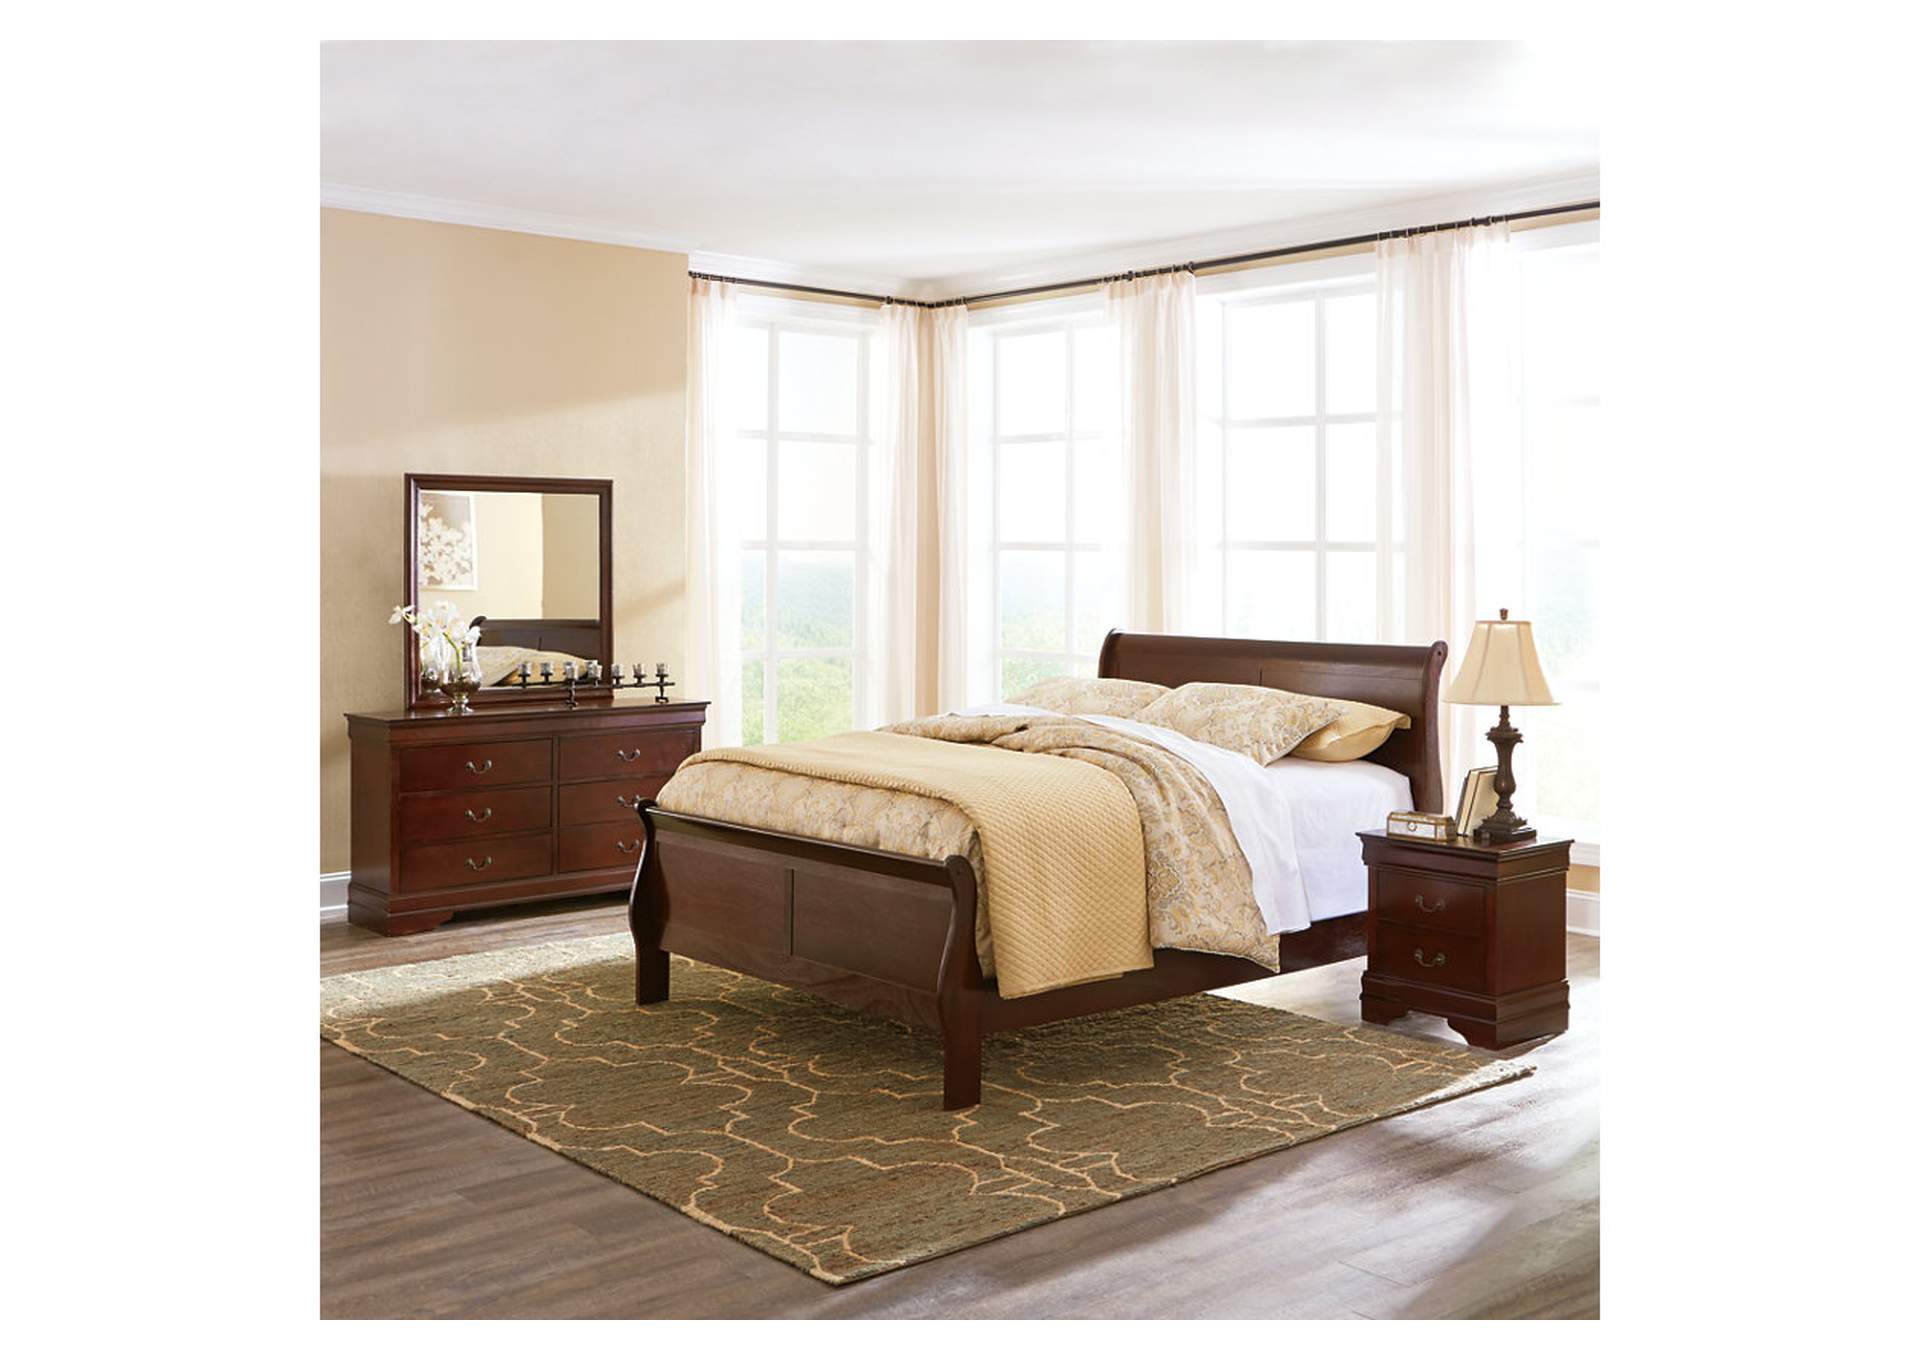 Alisdair Queen Sleigh Bed with 2 Nightstands,Signature Design By Ashley